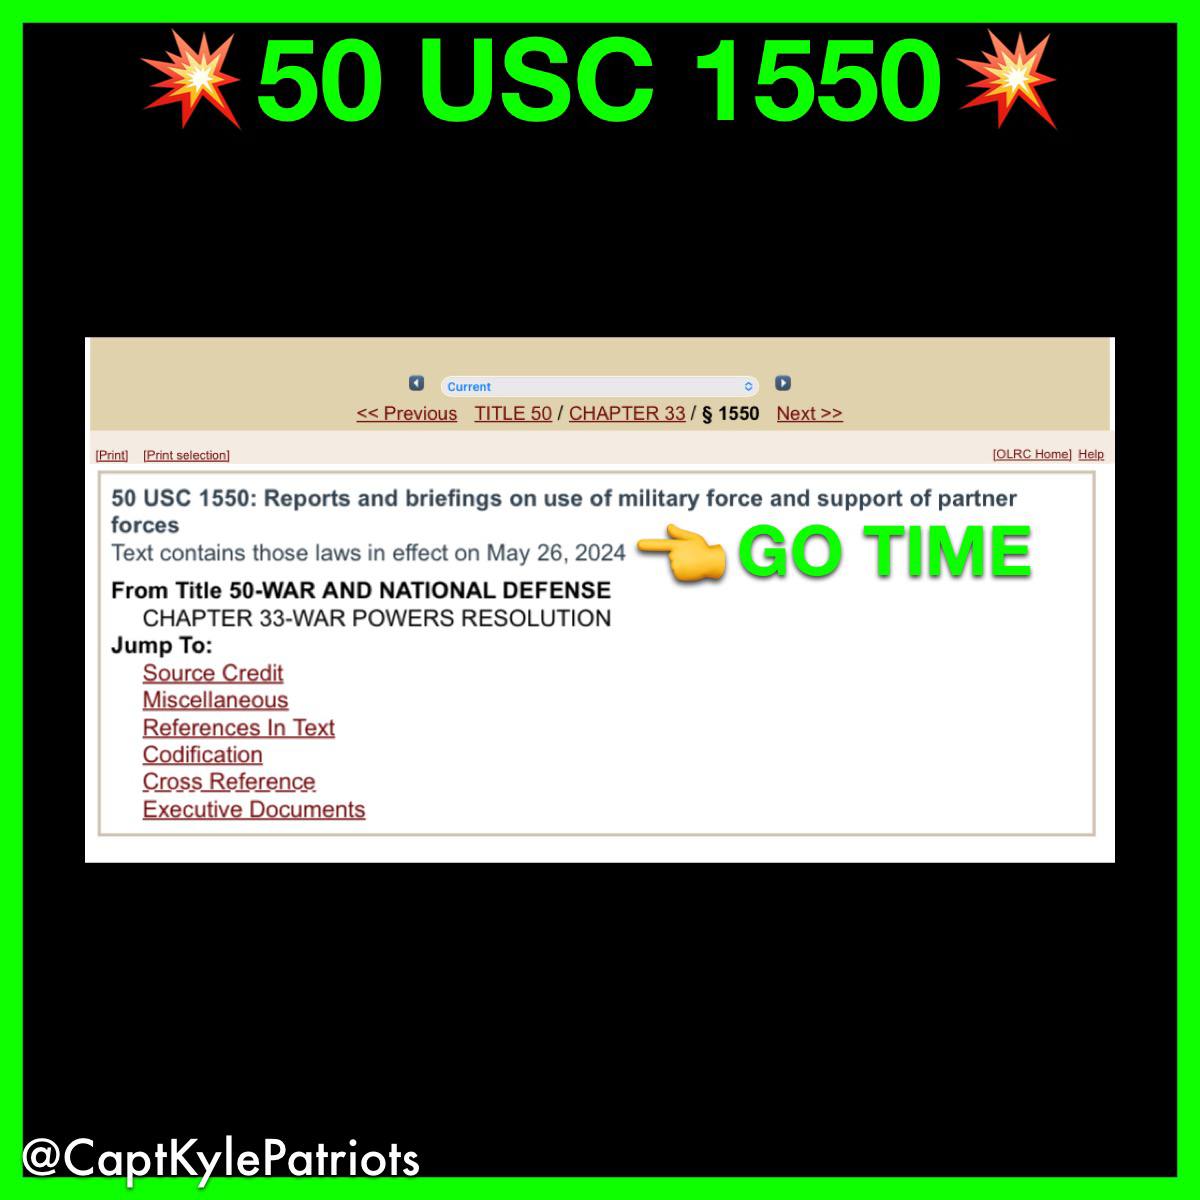 💥Y’all want a visual, here it is. 
💥50 USC 1550: Reports and briefings on use of military force and support of partner forces. 
💥Text contains those laws in effect May 26, 2024
📷
Link:
uscode.house.gov/view.xhtml?req…